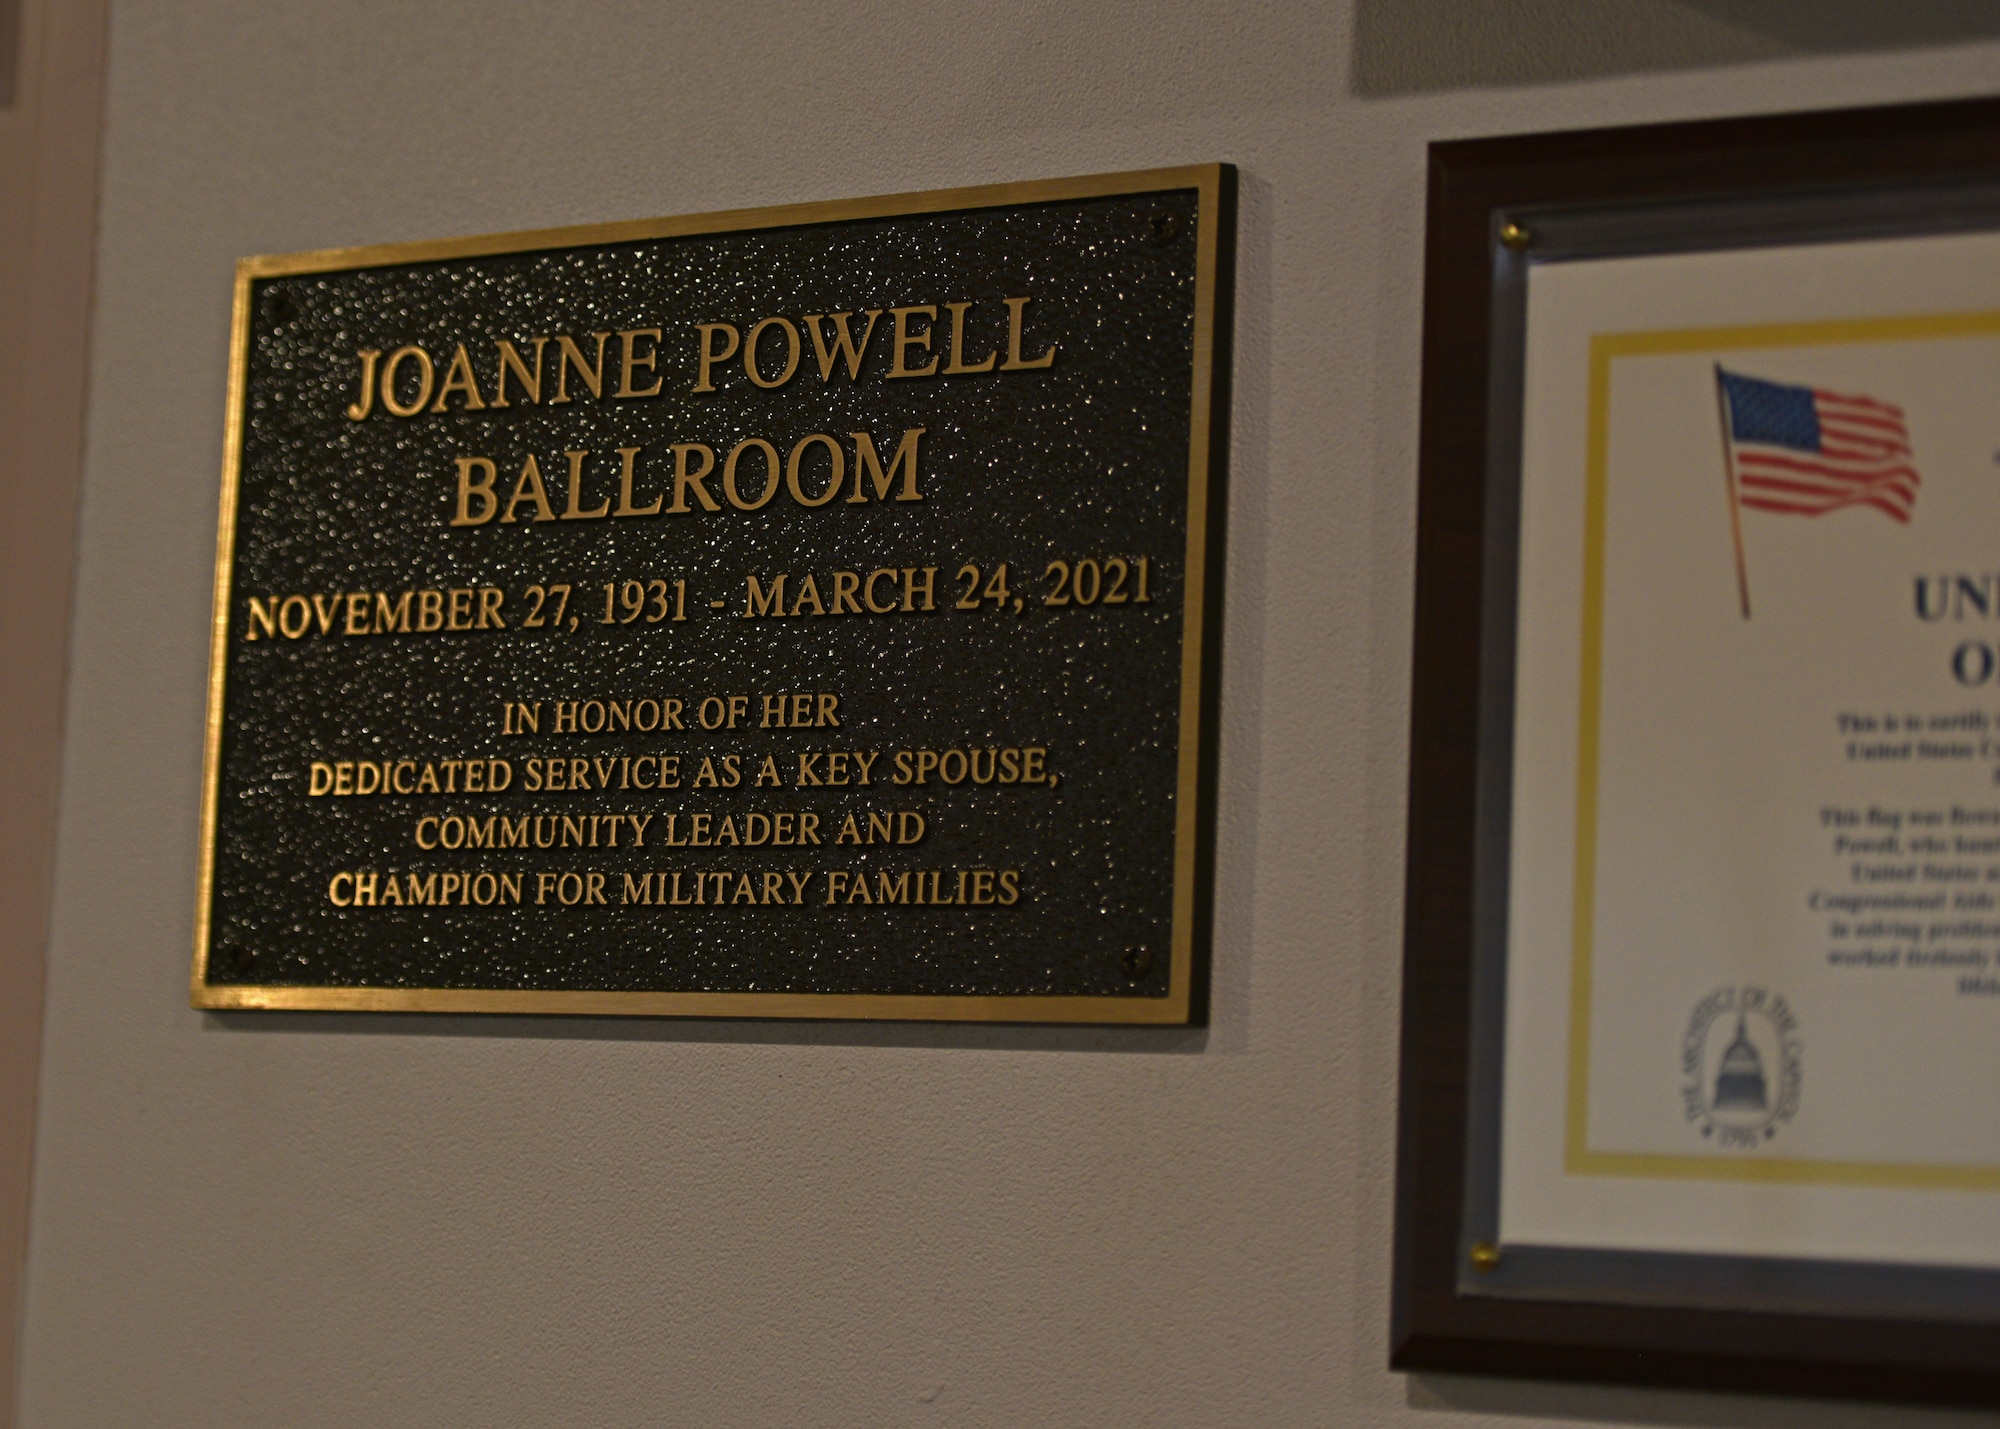 The plaque dedicating the JoAnne Powell ballroom during the Powell Event Center dedication ceremony on Goodfellow Air Force Base, Sept. 10, 2021. Joanne Powell was recognized for her dedication and service as a major member and leader in the San Angelo and Goodfellow community. (U.S. Air Force photo by Senior Airman Ashley Thrash)